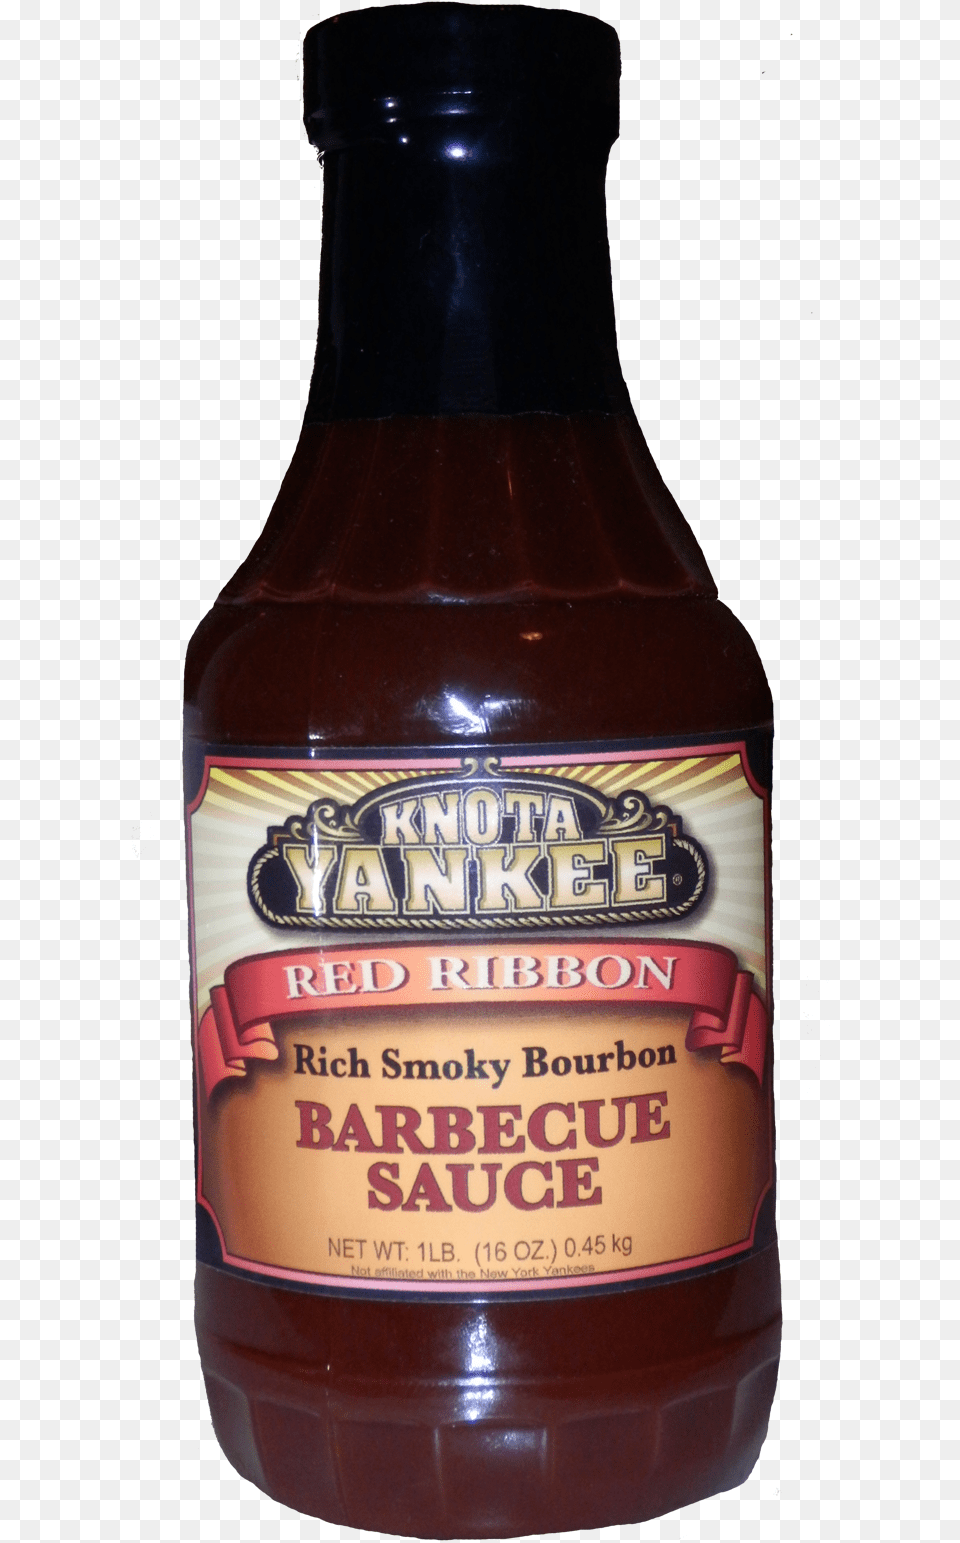 One Bottle Of Rich Smoky Bourbon Bbq Sauce Bottle Of Bbq Sauce, Alcohol, Beer, Beverage, Food Png